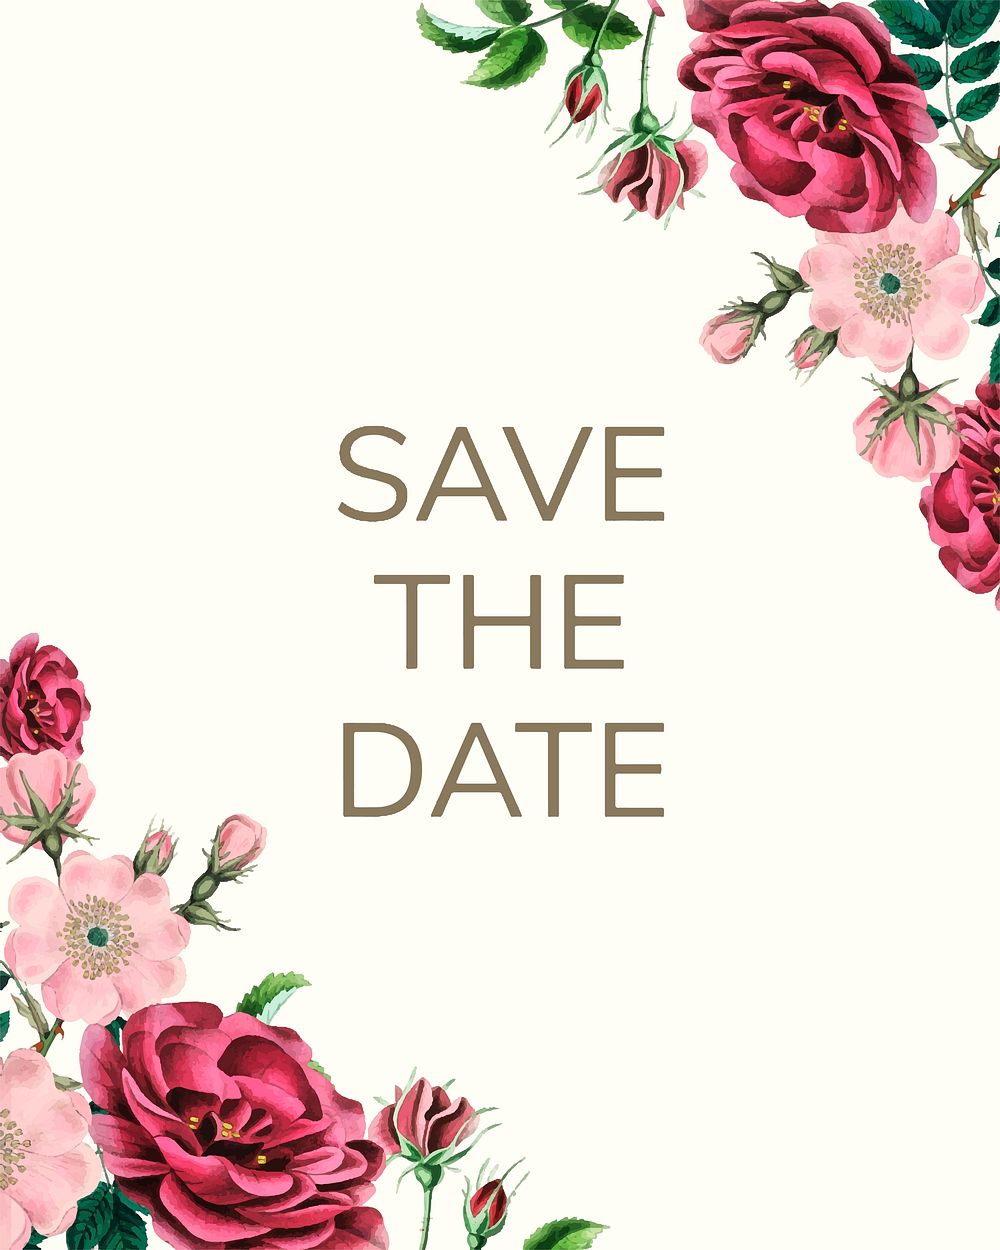 Save the date with floral design vector